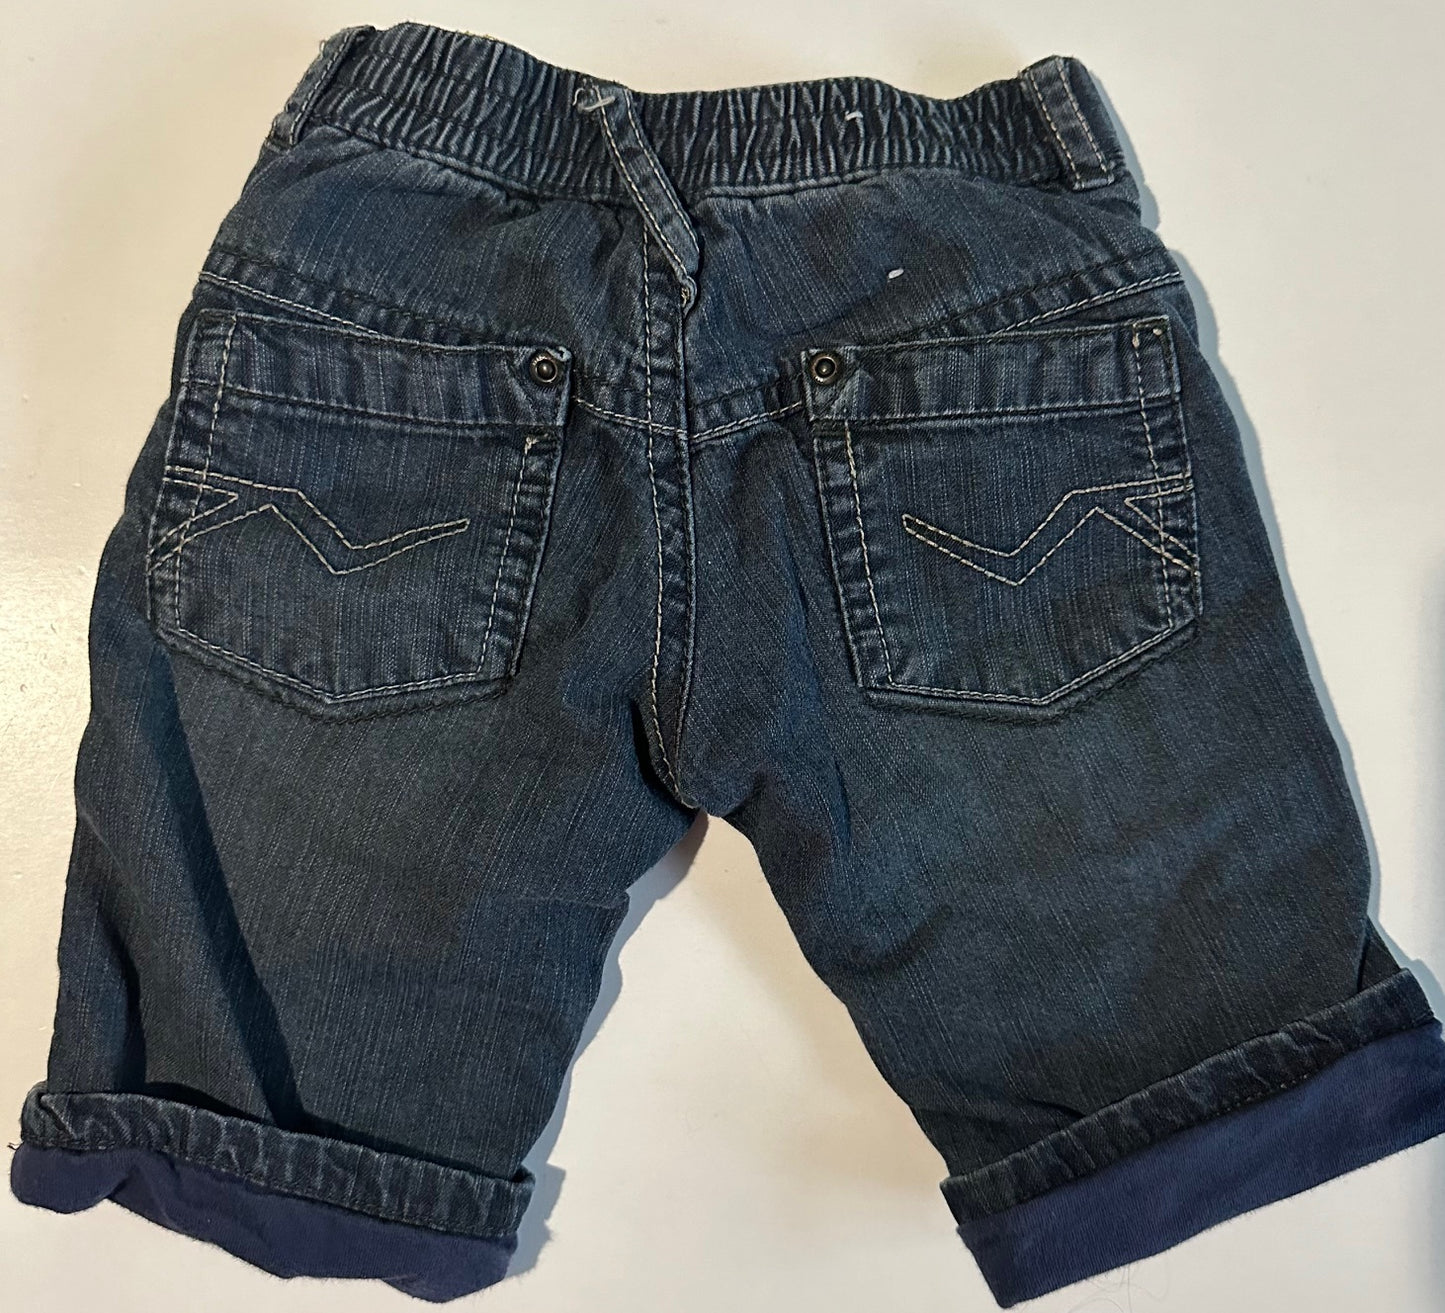 Mexx, Faded Black Lined Pants - 3-6 Months